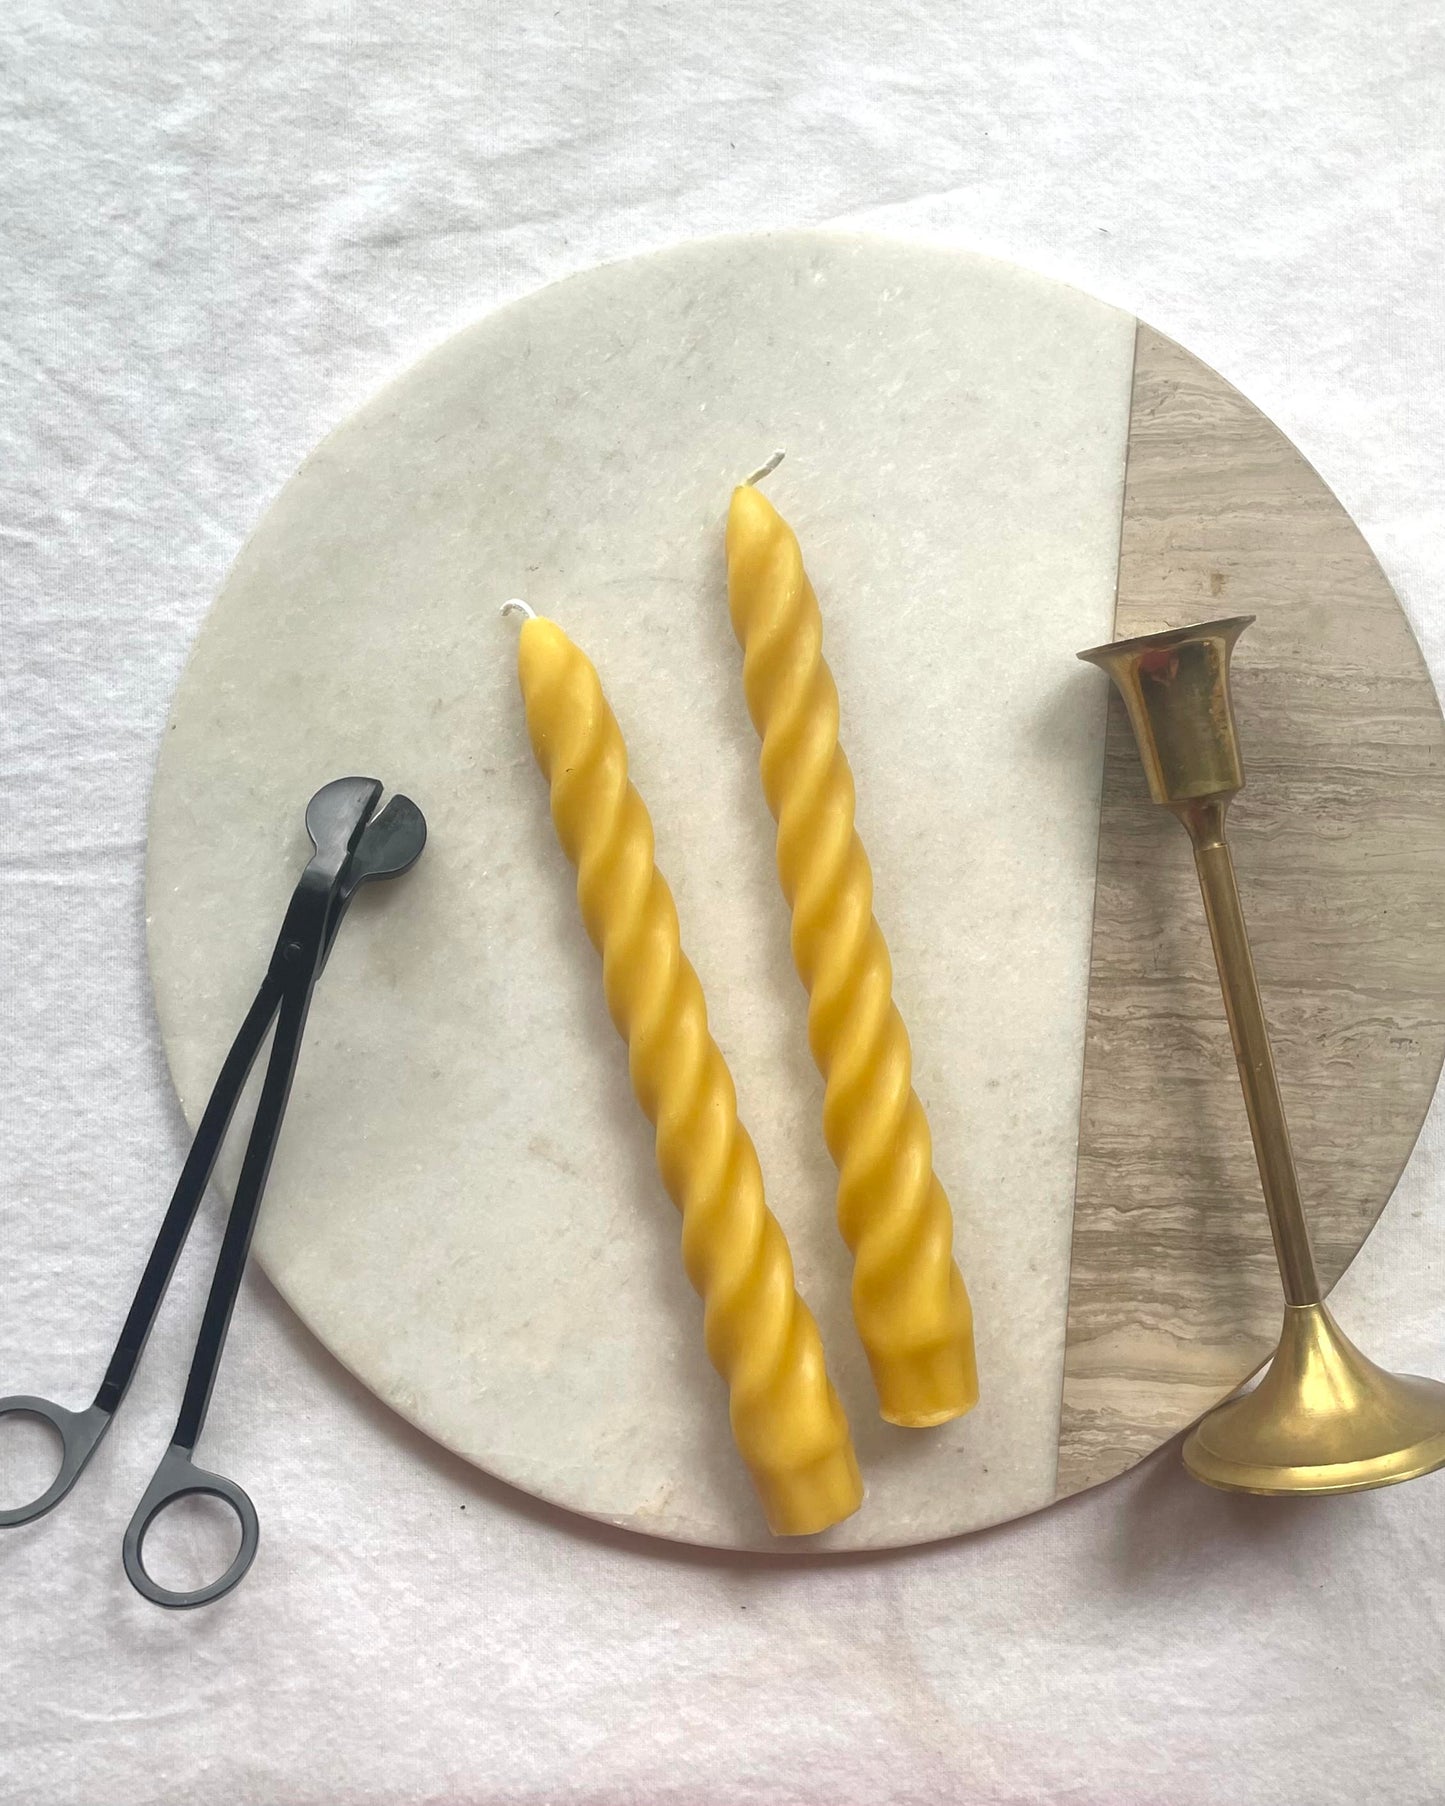 Taper Candles, Pair of 2 in 100% Beeswax, Twisted // Tapers, Twist, Tapered Candles, Beeswax Candles, 8" Tapers, Eco Friendly, Decor